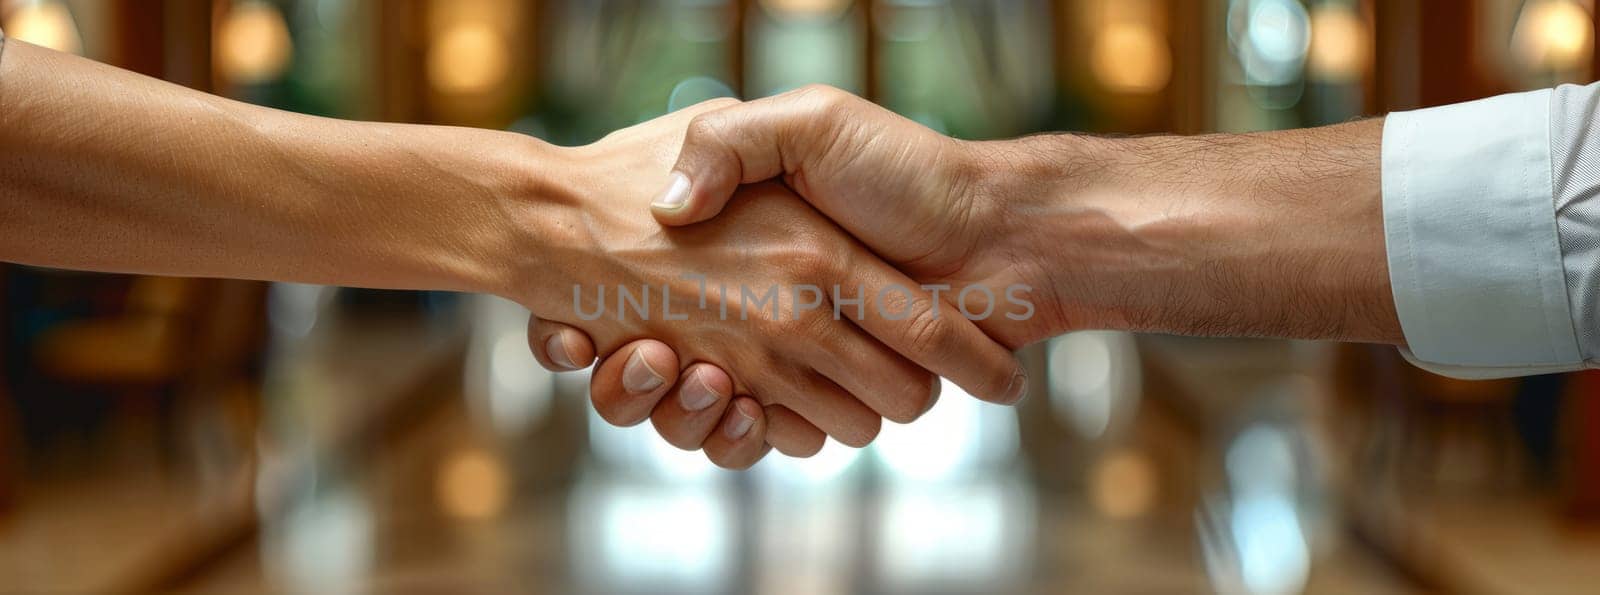 A man and a woman share a formal handshake gesture in the hallway by richwolf